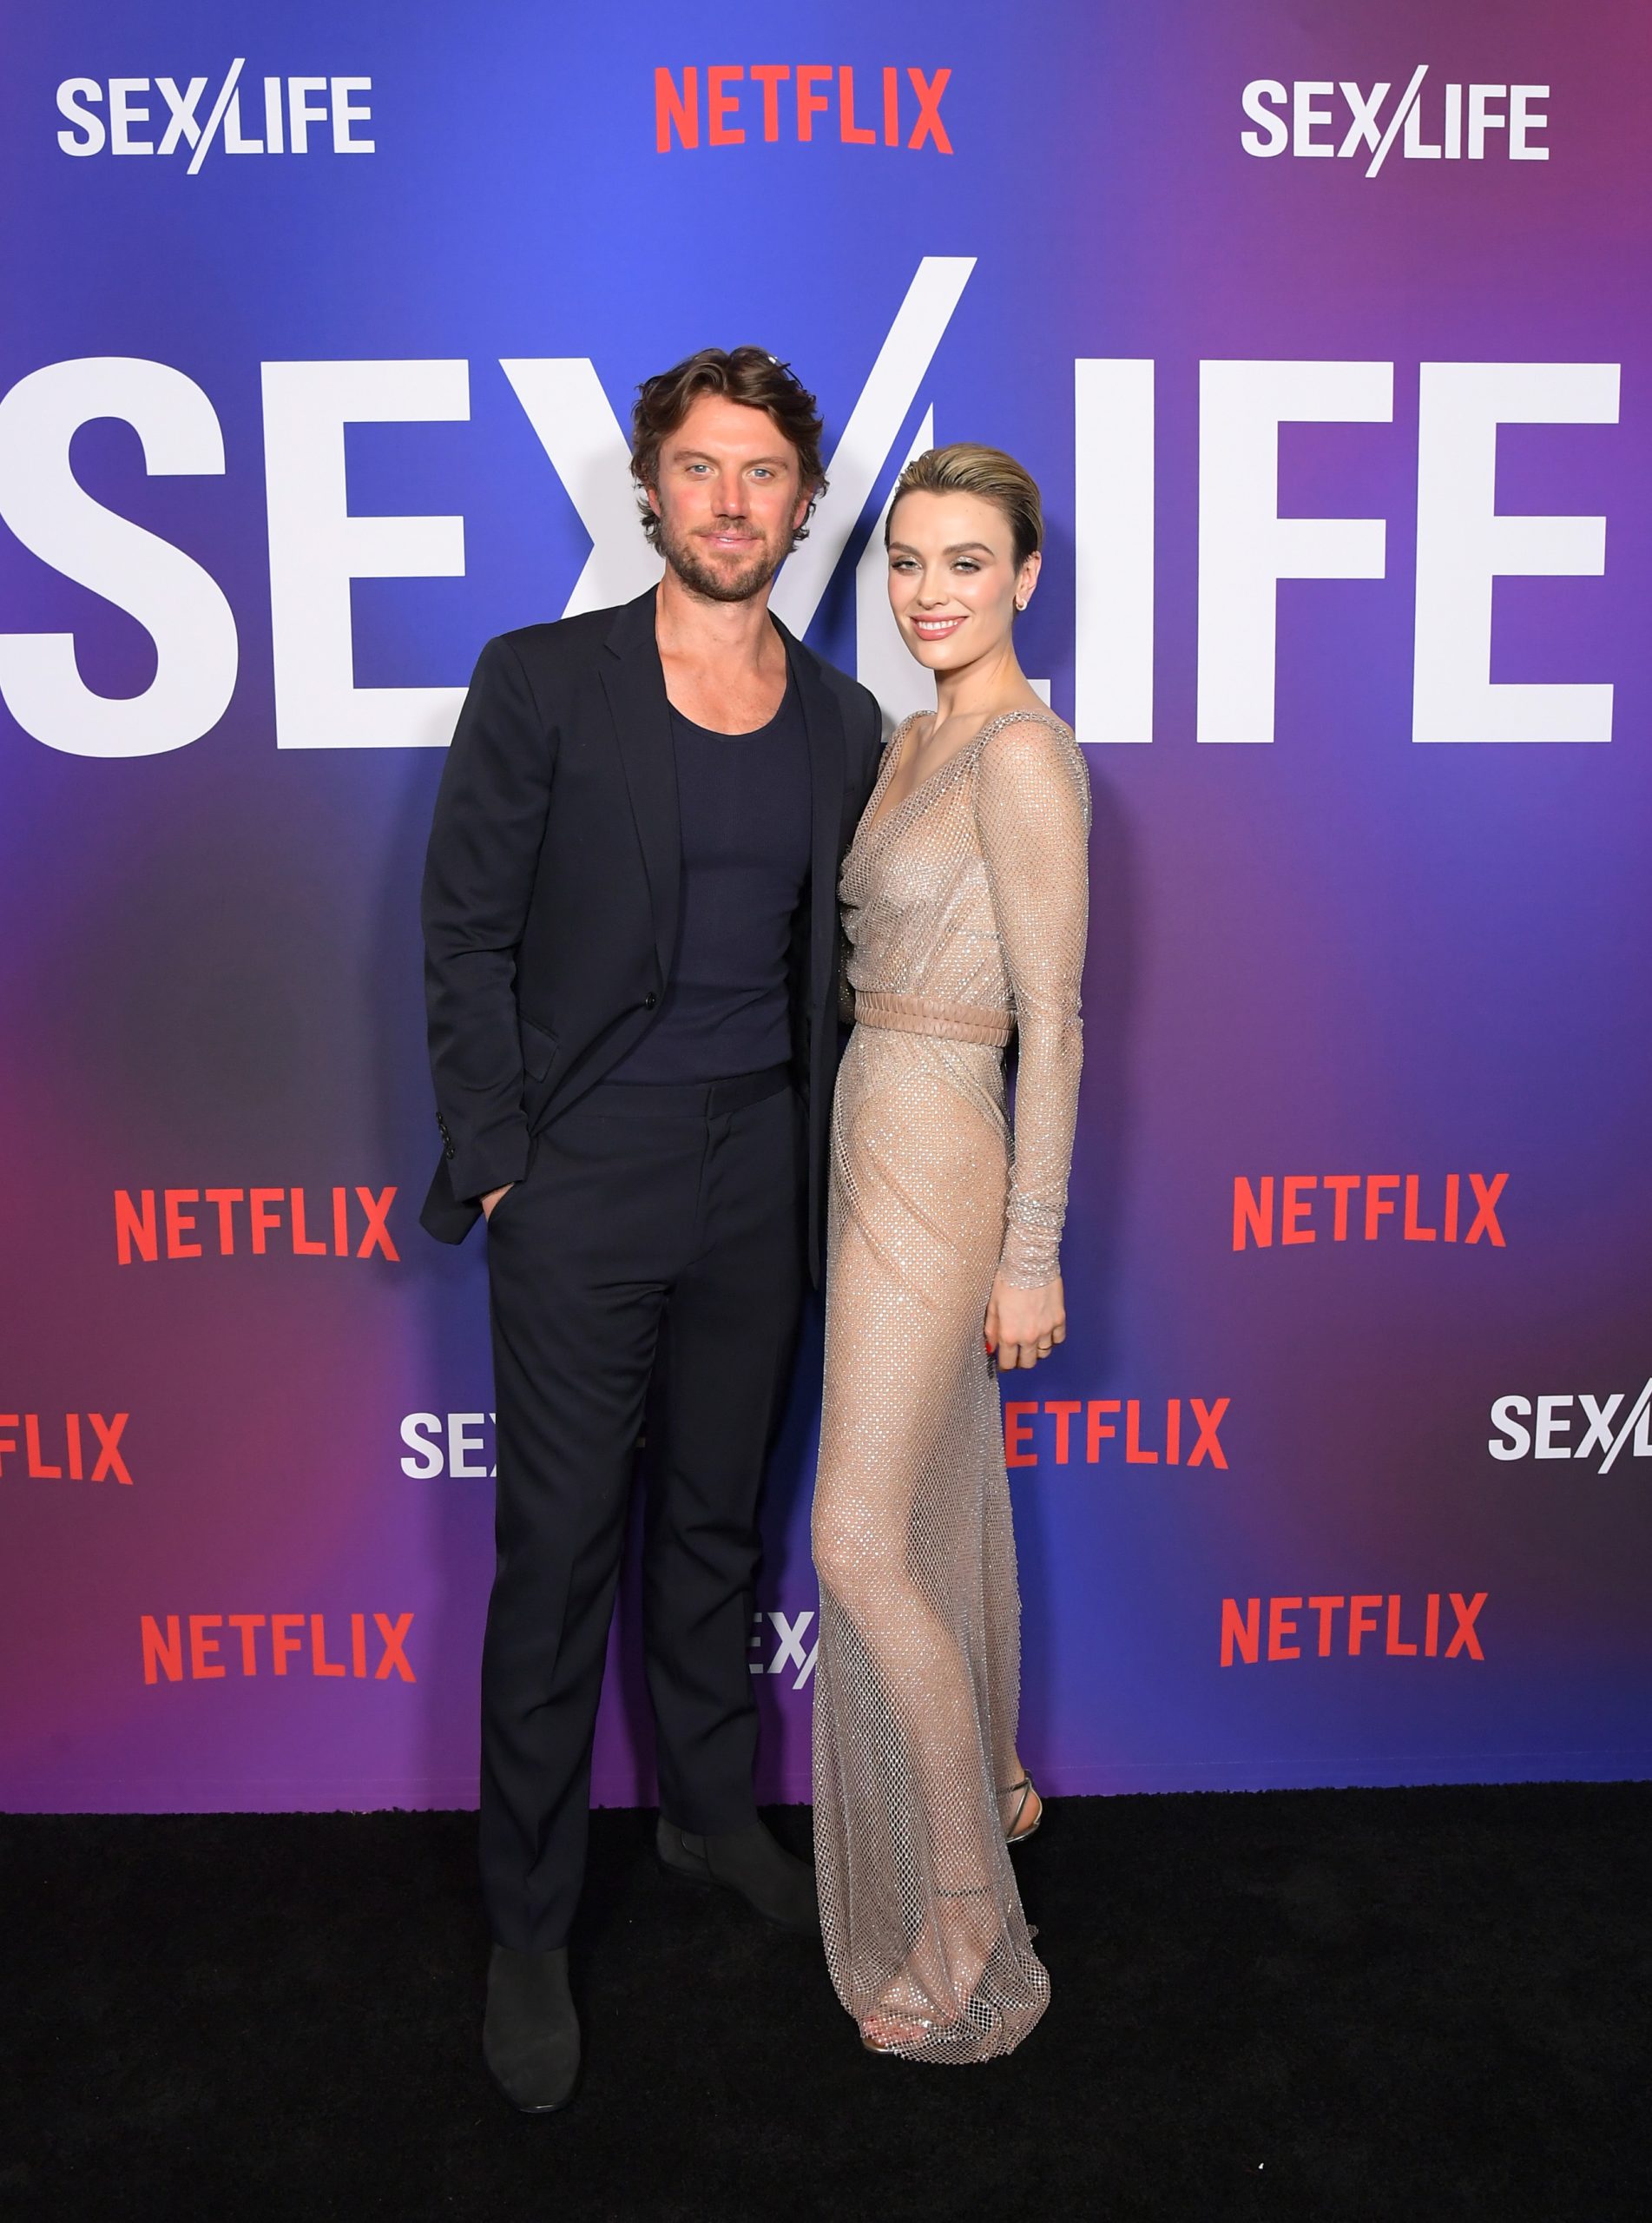 LOS ANGELES, CALIFORNIA - FEBRUARY 23: (L-R) Adam Demos and Wallis Day attend Netflix's "Sex/Life" Season 2 Special Screening at the Roma Theatre at Netflix - EPIC on February 23, 2023 in Los Angeles, California. (Photo by Charley Gallay/Getty Images for Netflix)